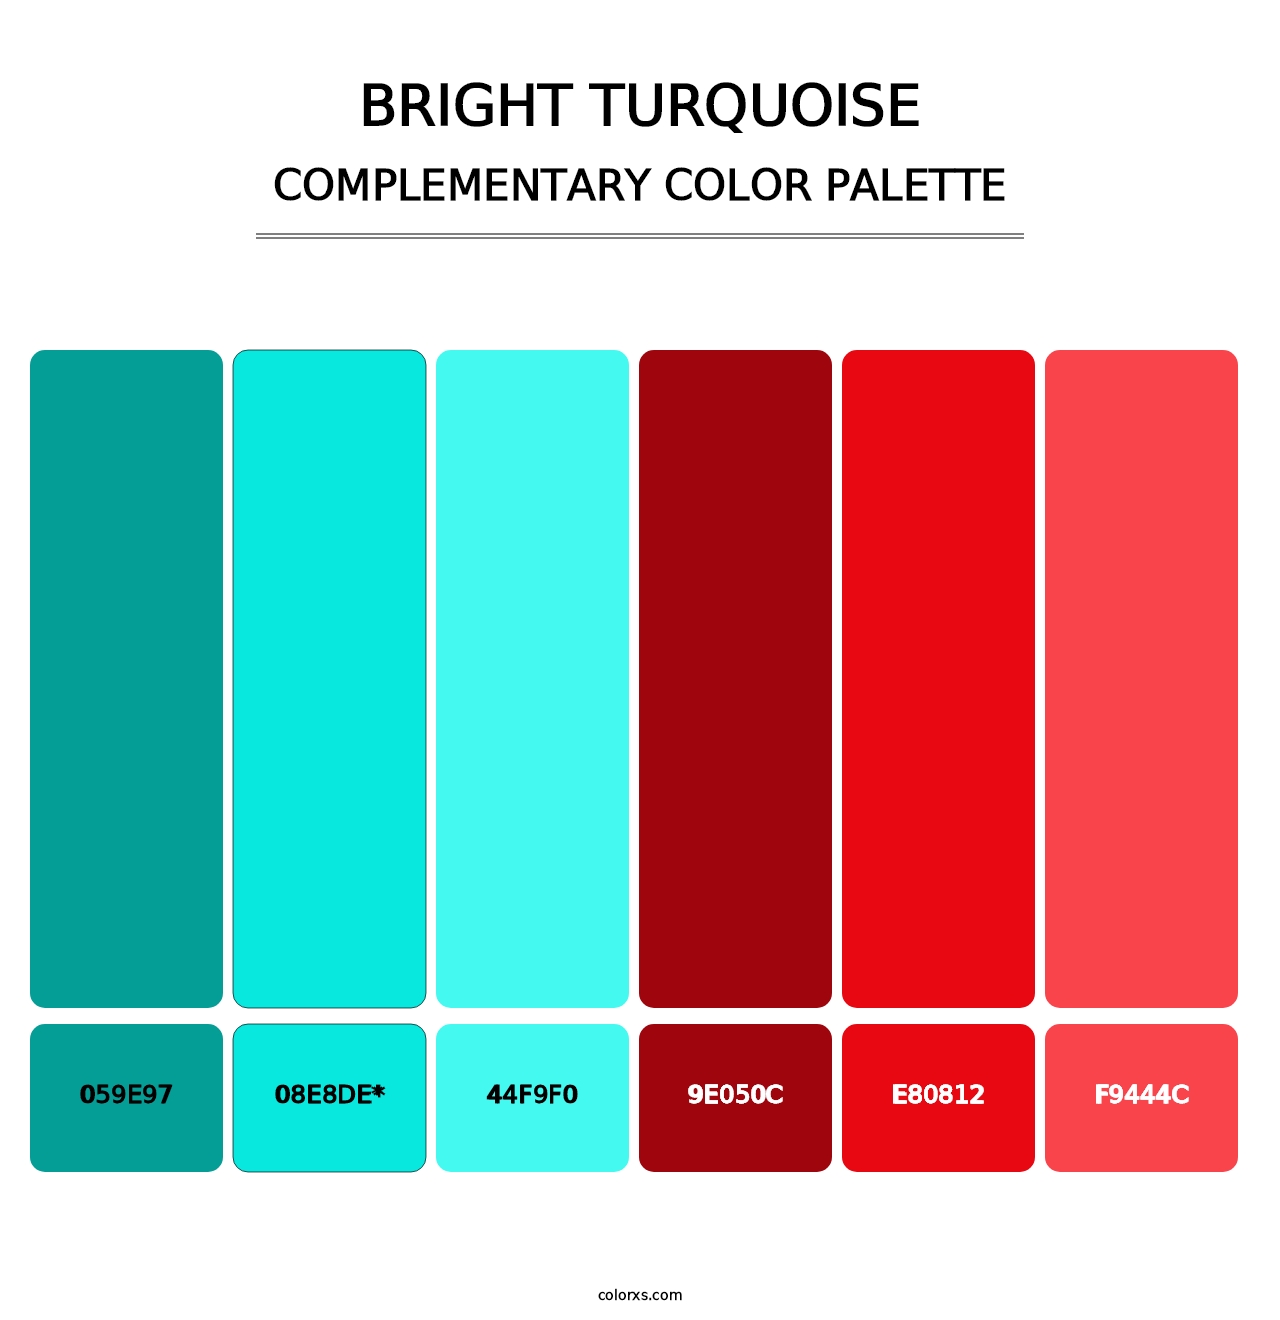 Bright Turquoise - Complementary Color Palette